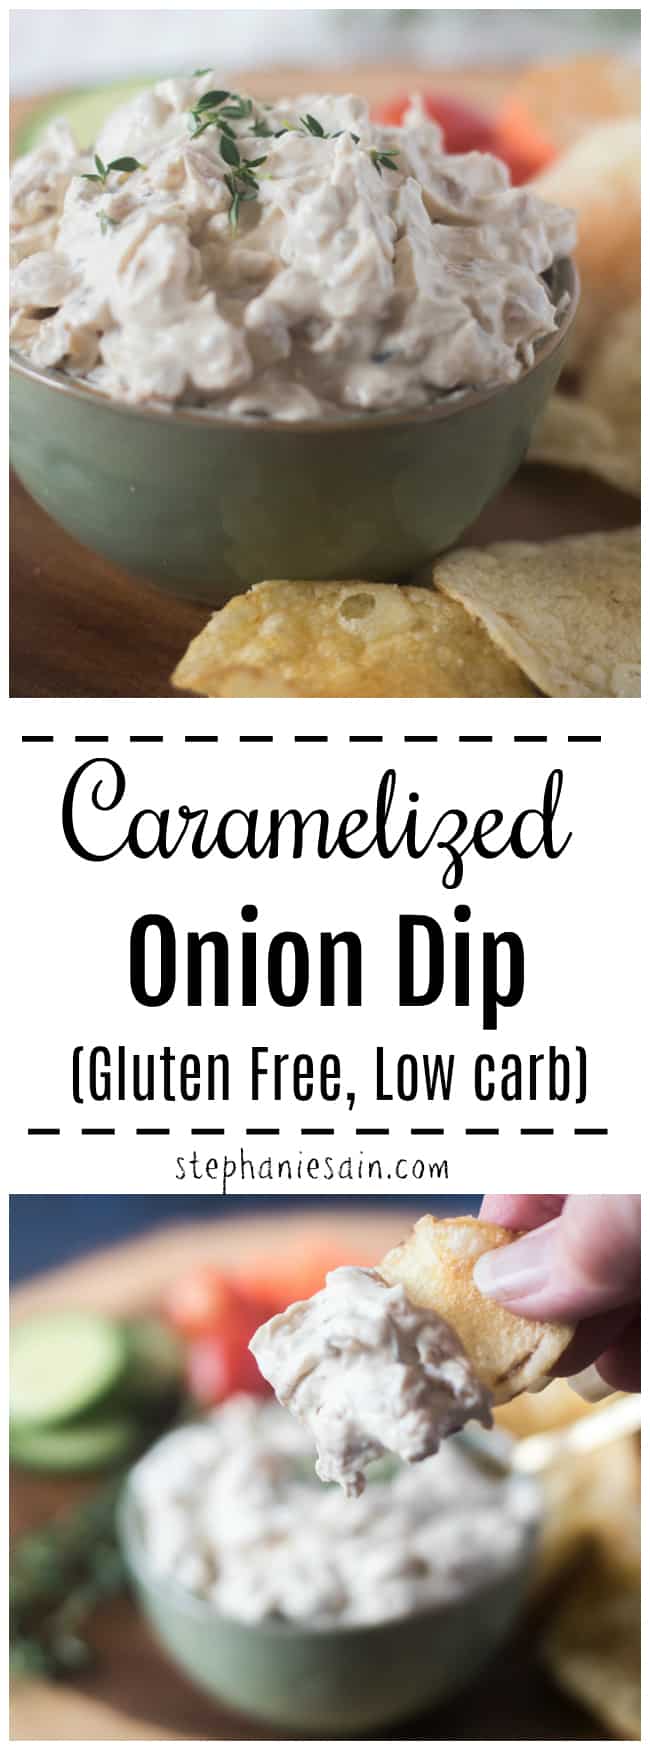 This Caramelized Onion dip is simple to prepare and a tasty dip to serve at parties, for entertaining or movie night. Loaded with sweet, nutty caramelized onions and is great served with veggies or chips. Gluten Free, Easy, and Low Carb.